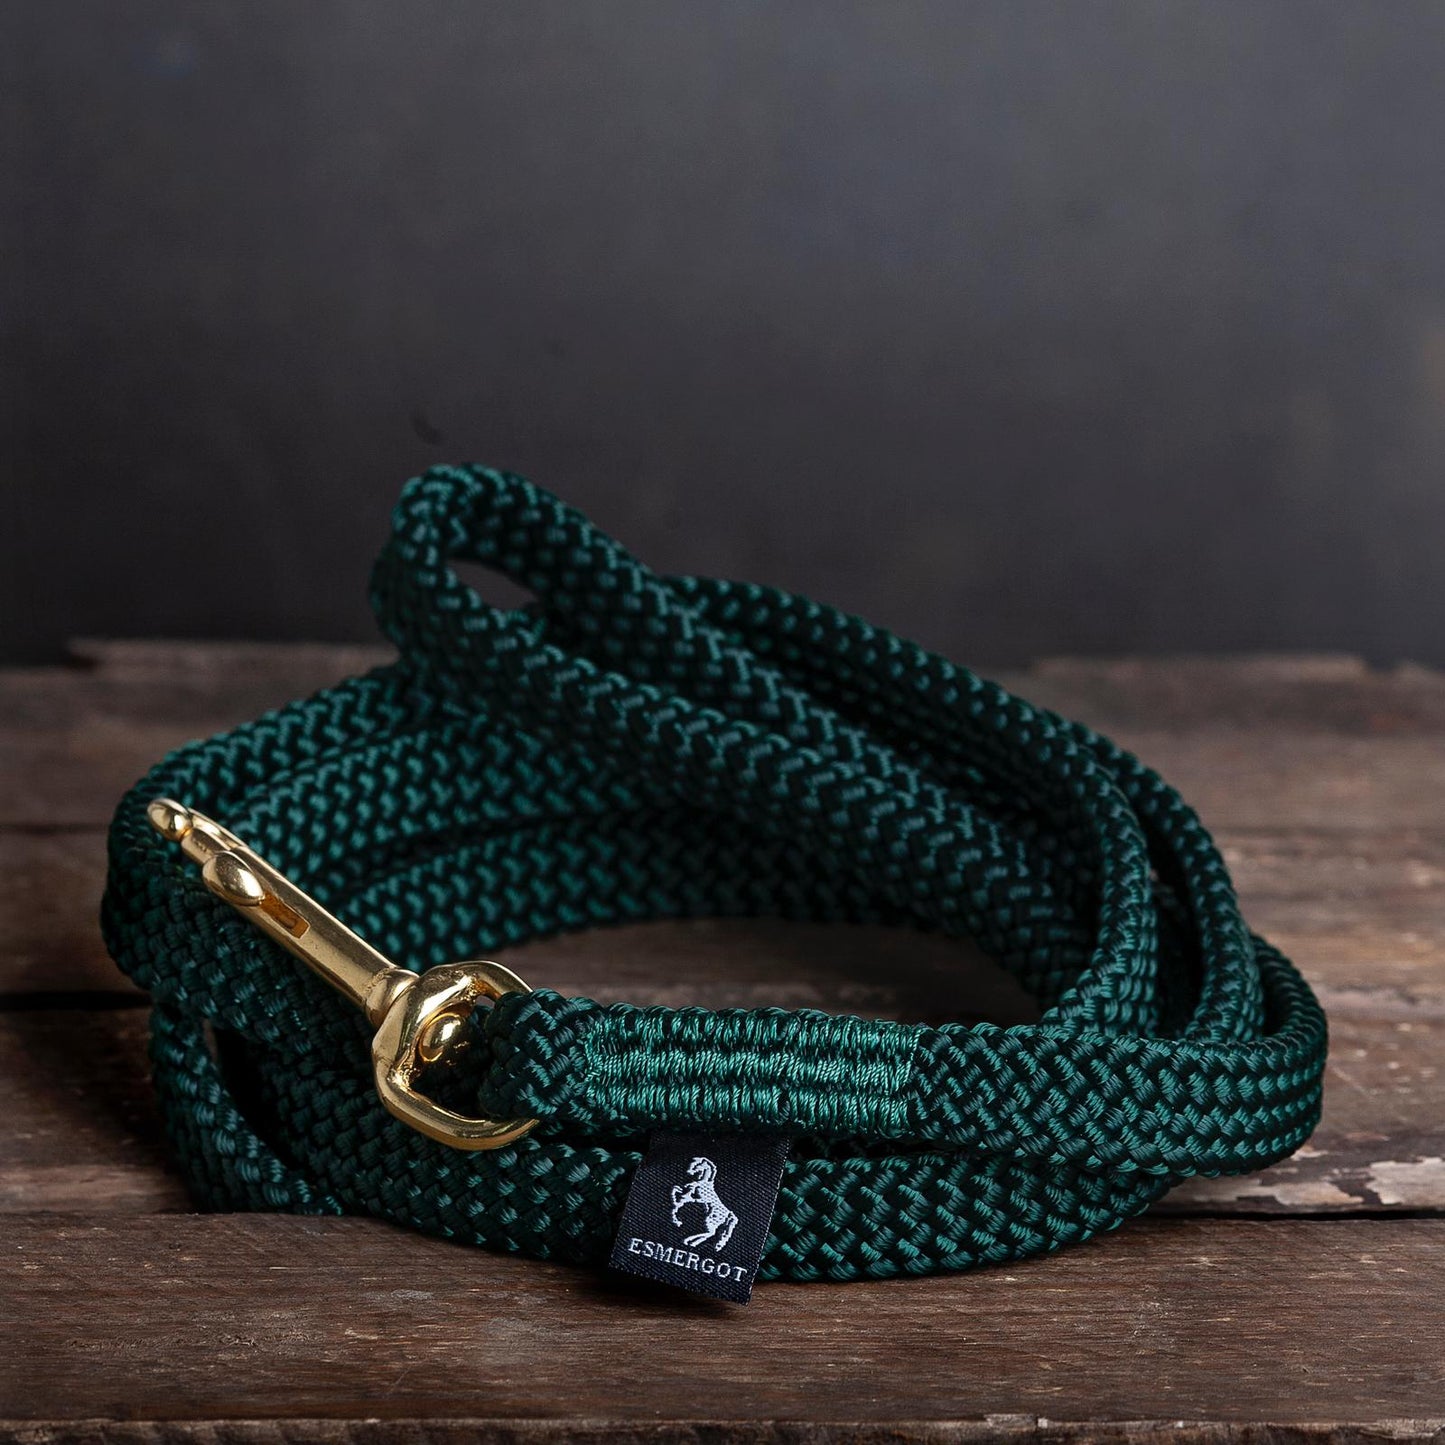 Dog leash with brass shaker